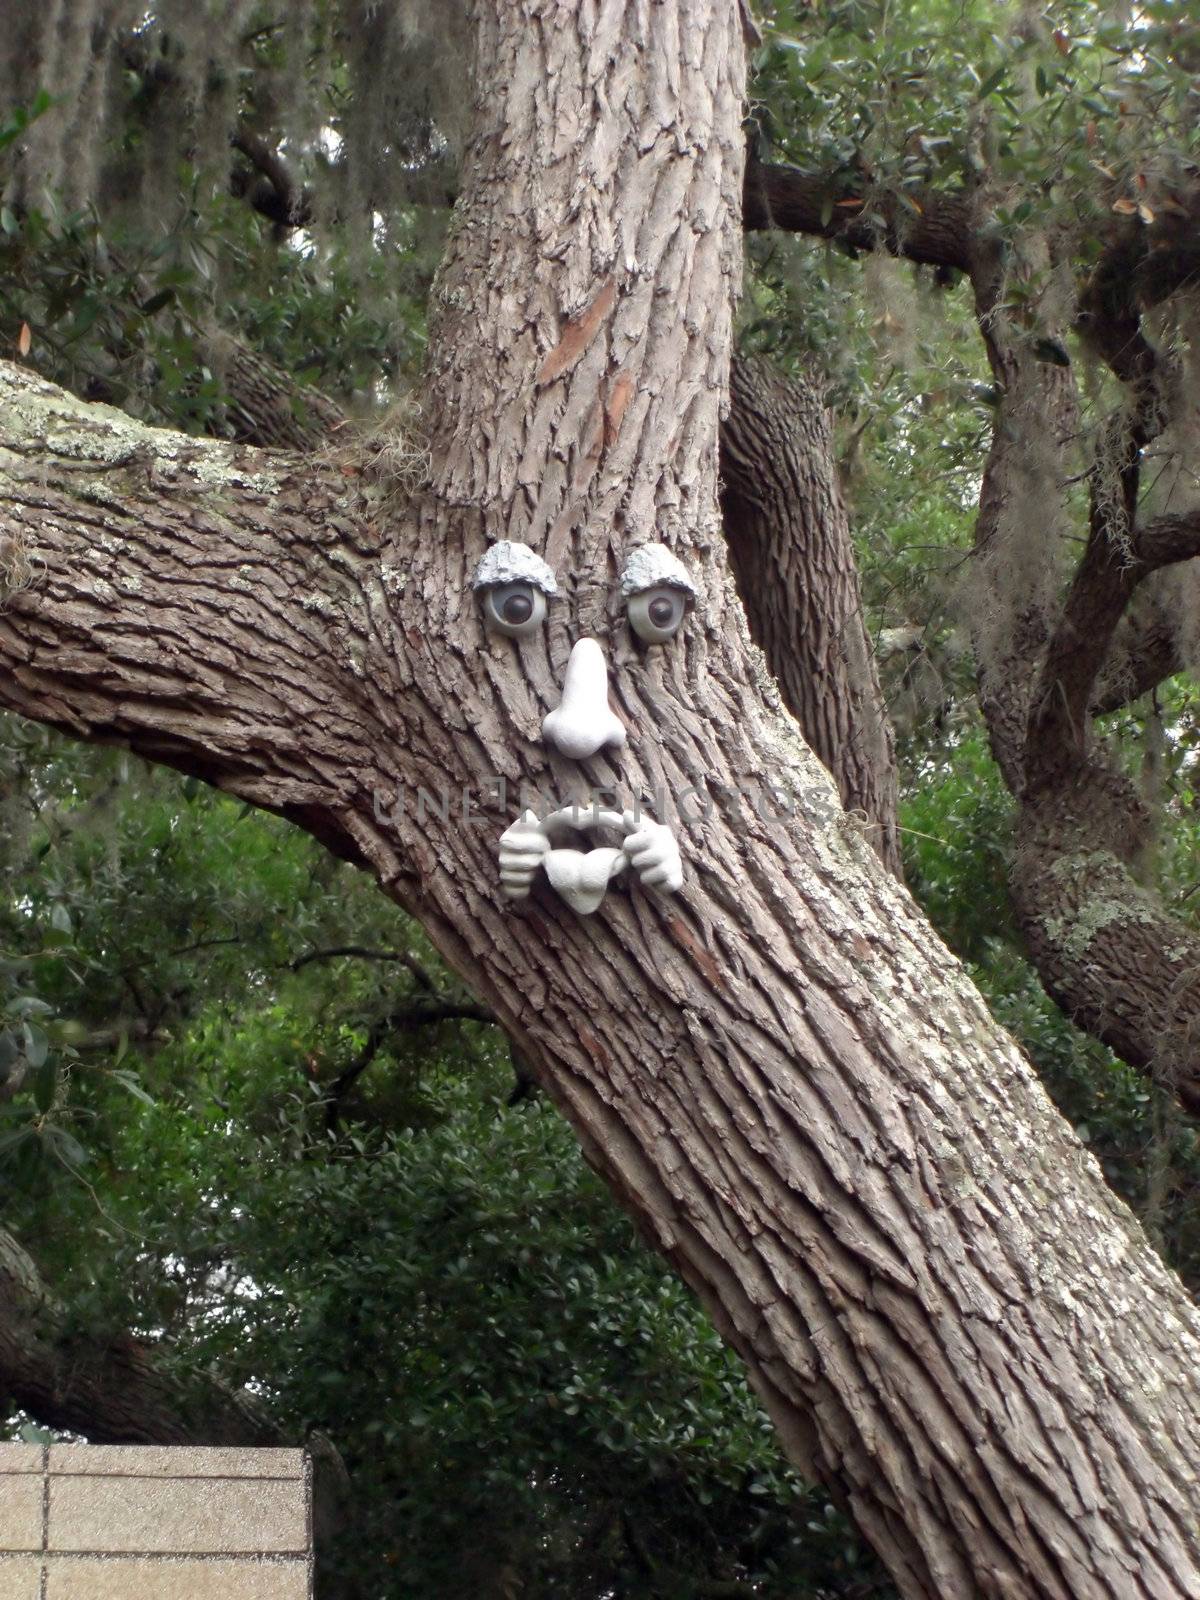 An abstract creation of a man's face with a moustache on a tree in the forest